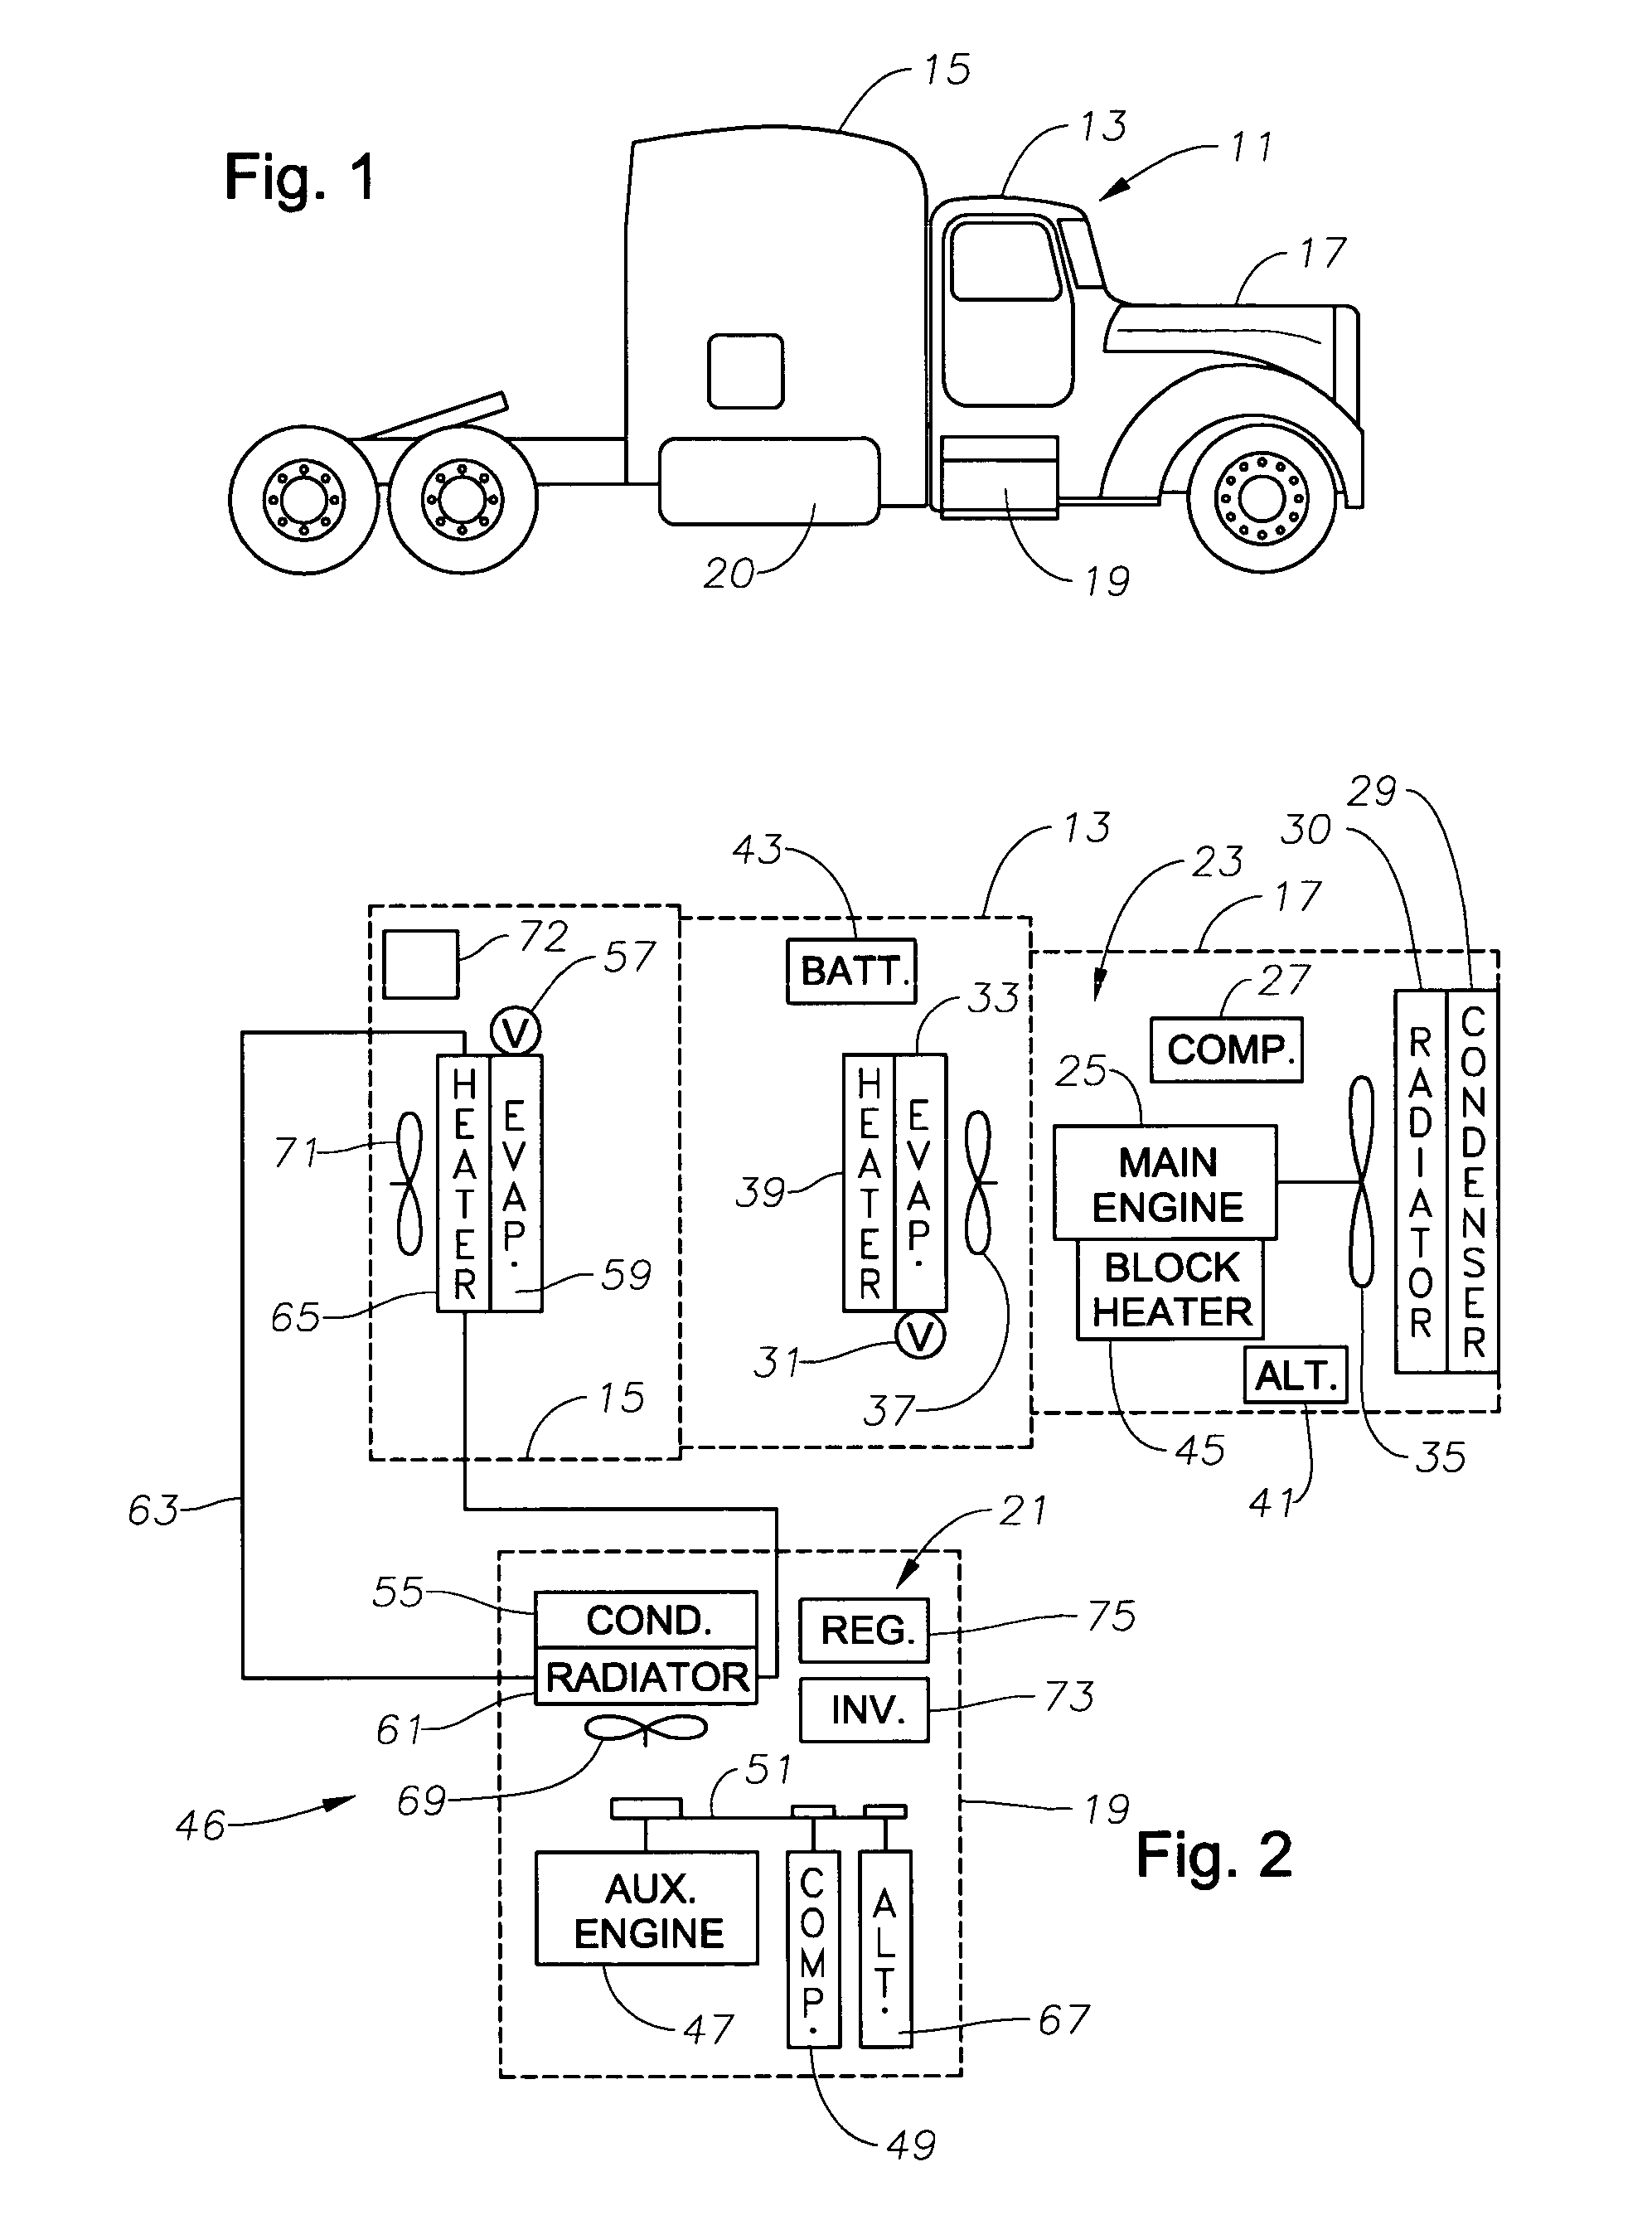 Vehicle auxiliary power unit, assembly, and related methods